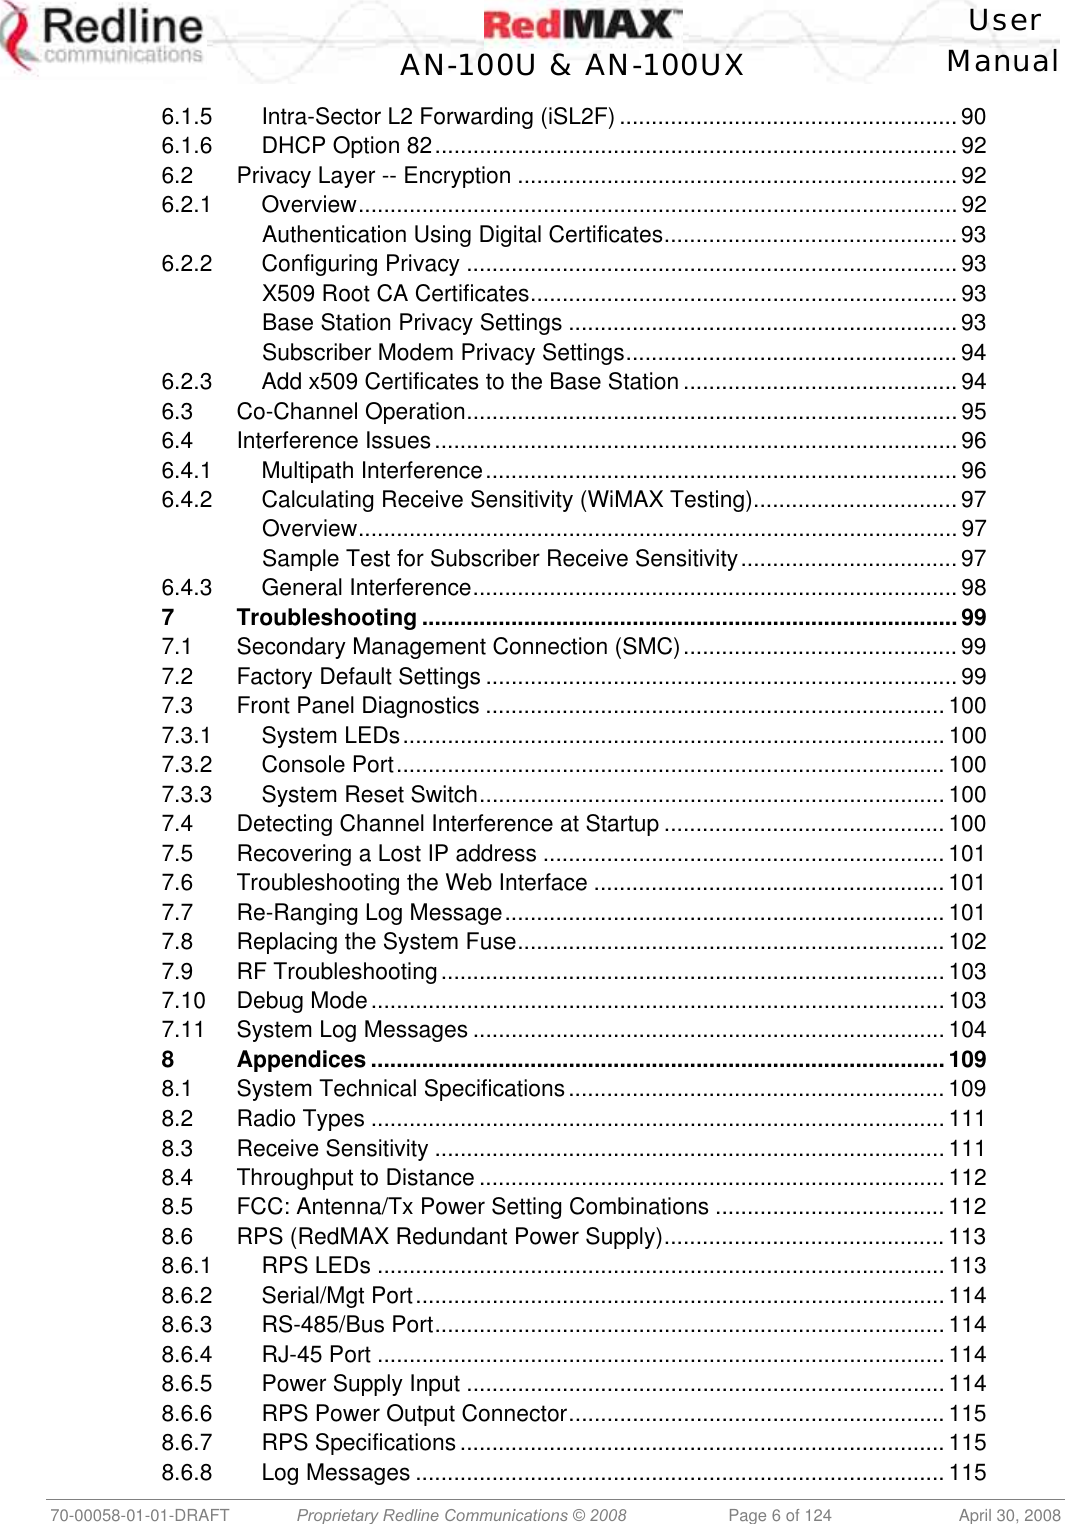    User  AN-100U &amp; AN-100UX Manual   70-00058-01-01-DRAFT  Proprietary Redline Communications © 2008   Page 6 of 124  April 30, 2008 6.1.5 Intra-Sector L2 Forwarding (iSL2F) ..................................................... 90 6.1.6 DHCP Option 82.................................................................................. 92 6.2 Privacy Layer -- Encryption .....................................................................92 6.2.1 Overview.............................................................................................. 92 Authentication Using Digital Certificates.............................................. 93 6.2.2 Configuring Privacy .............................................................................93 X509 Root CA Certificates...................................................................93 Base Station Privacy Settings ............................................................. 93 Subscriber Modem Privacy Settings.................................................... 94 6.2.3 Add x509 Certificates to the Base Station ........................................... 94 6.3 Co-Channel Operation.............................................................................95 6.4 Interference Issues..................................................................................96 6.4.1 Multipath Interference.......................................................................... 96 6.4.2 Calculating Receive Sensitivity (WiMAX Testing)................................ 97 Overview.............................................................................................. 97 Sample Test for Subscriber Receive Sensitivity.................................. 97 6.4.3 General Interference............................................................................ 98 7 Troubleshooting .................................................................................... 99 7.1 Secondary Management Connection (SMC)........................................... 99 7.2 Factory Default Settings .......................................................................... 99 7.3 Front Panel Diagnostics ........................................................................ 100 7.3.1 System LEDs..................................................................................... 100 7.3.2 Console Port...................................................................................... 100 7.3.3 System Reset Switch......................................................................... 100 7.4 Detecting Channel Interference at Startup ............................................ 100 7.5 Recovering a Lost IP address ............................................................... 101 7.6 Troubleshooting the Web Interface ....................................................... 101 7.7 Re-Ranging Log Message..................................................................... 101 7.8 Replacing the System Fuse................................................................... 102 7.9 RF Troubleshooting............................................................................... 103 7.10 Debug Mode.......................................................................................... 103 7.11 System Log Messages .......................................................................... 104 8 Appendices .......................................................................................... 109 8.1 System Technical Specifications........................................................... 109 8.2 Radio Types .......................................................................................... 111 8.3 Receive Sensitivity ................................................................................ 111 8.4 Throughput to Distance ......................................................................... 112 8.5 FCC: Antenna/Tx Power Setting Combinations .................................... 112 8.6 RPS (RedMAX Redundant Power Supply)............................................ 113 8.6.1 RPS LEDs .........................................................................................113 8.6.2 Serial/Mgt Port................................................................................... 114 8.6.3 RS-485/Bus Port................................................................................ 114 8.6.4 RJ-45 Port .........................................................................................114 8.6.5 Power Supply Input ........................................................................... 114 8.6.6 RPS Power Output Connector........................................................... 115 8.6.7 RPS Specifications ............................................................................ 115 8.6.8 Log Messages ................................................................................... 115 